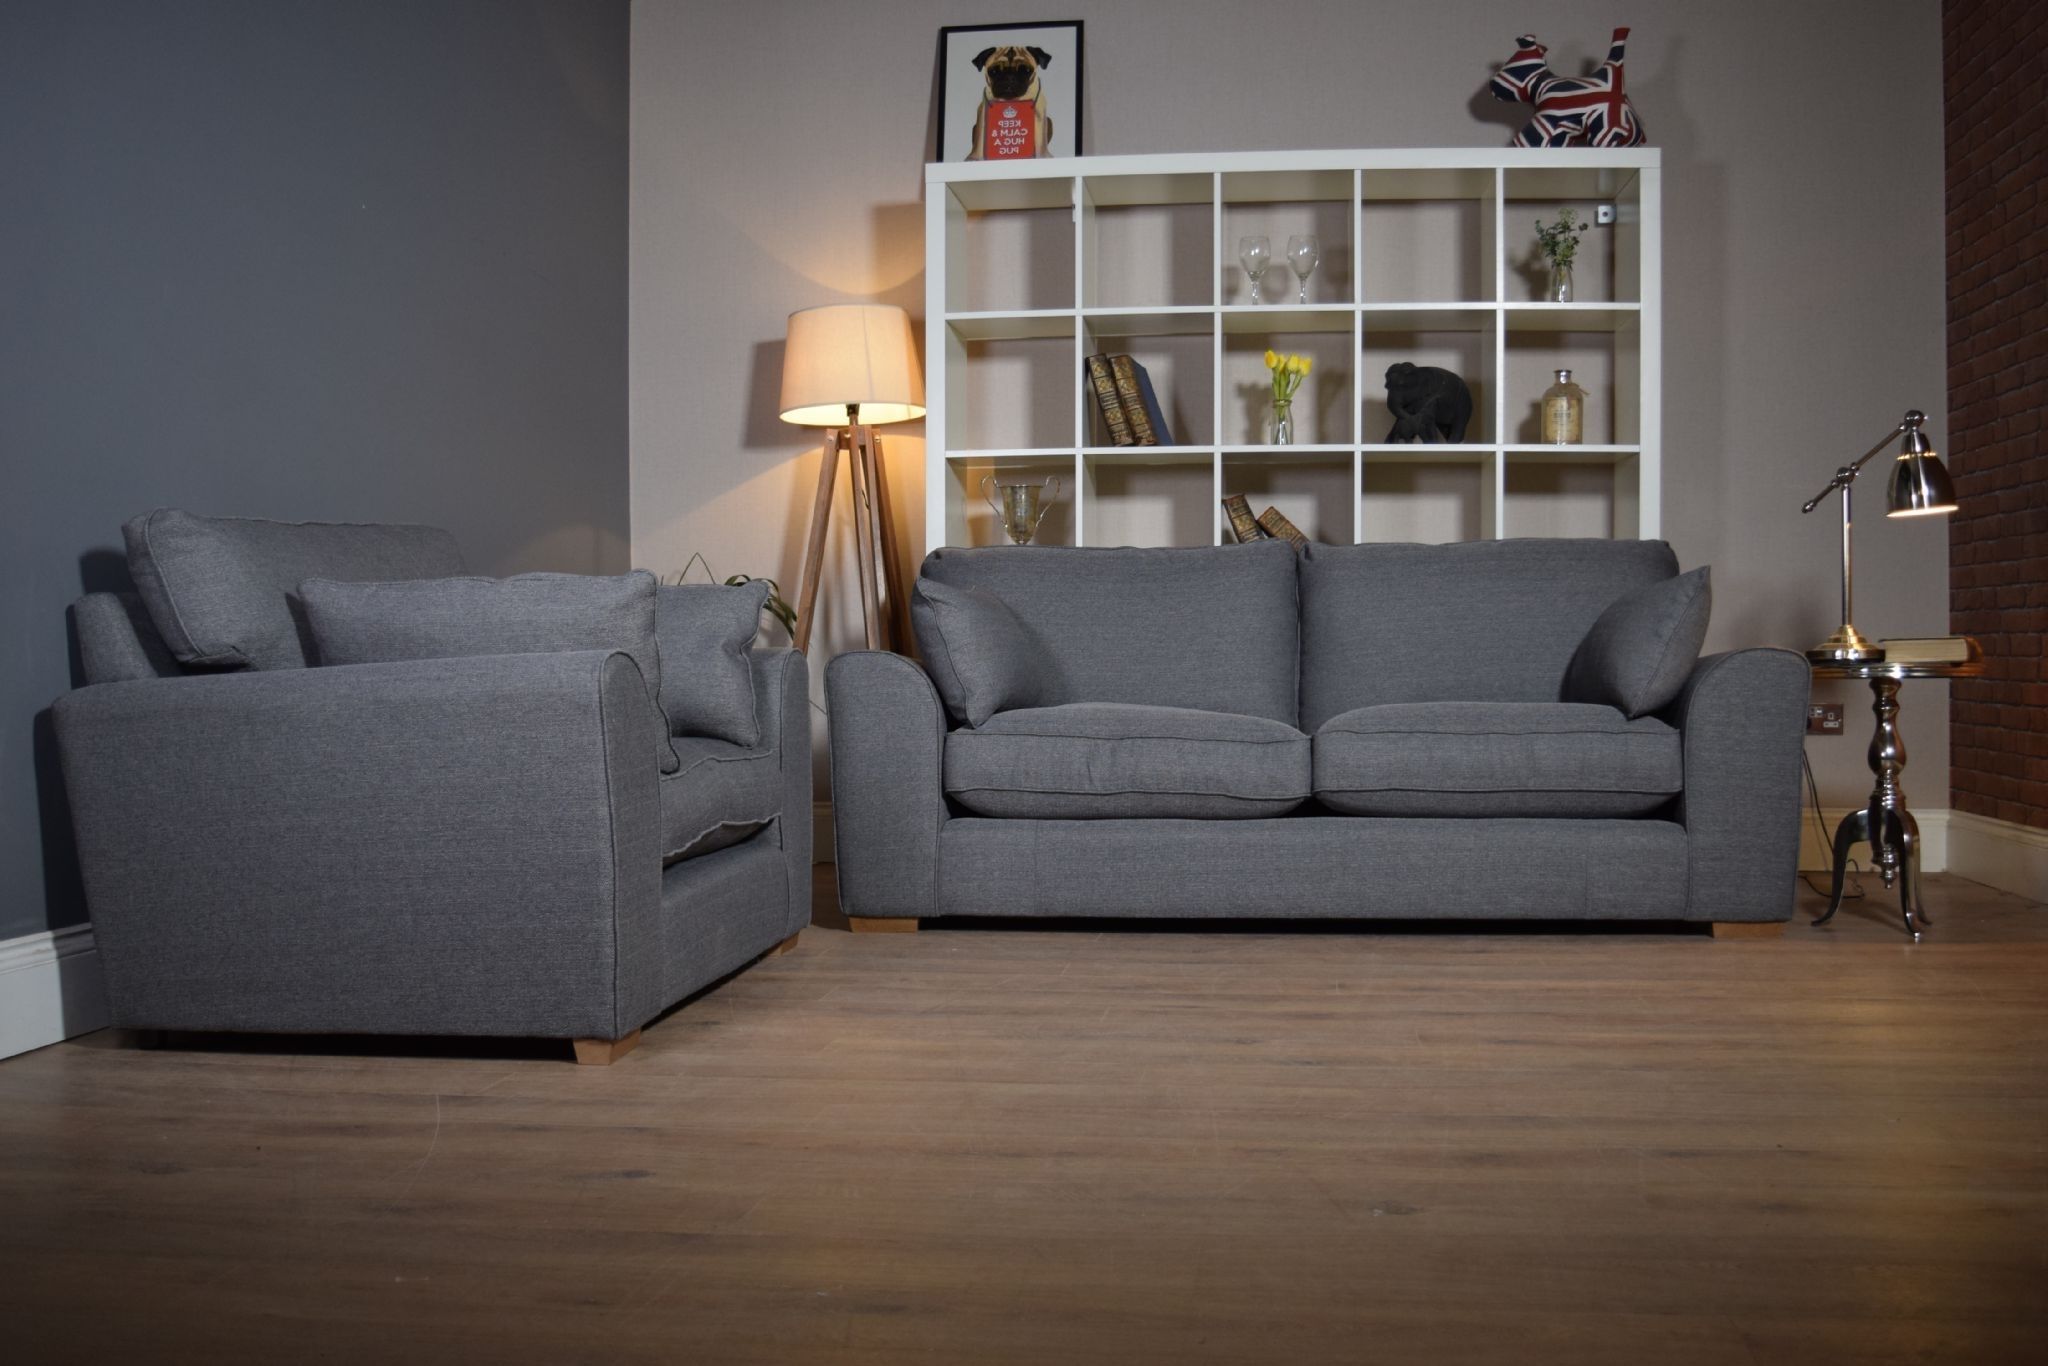 Set Ashdown 3 Seater Sofa & Cuddle Chair Set – Grey – Out Of Stock For 2018 3 Seater Sofas And Cuddle Chairs (View 2 of 15)